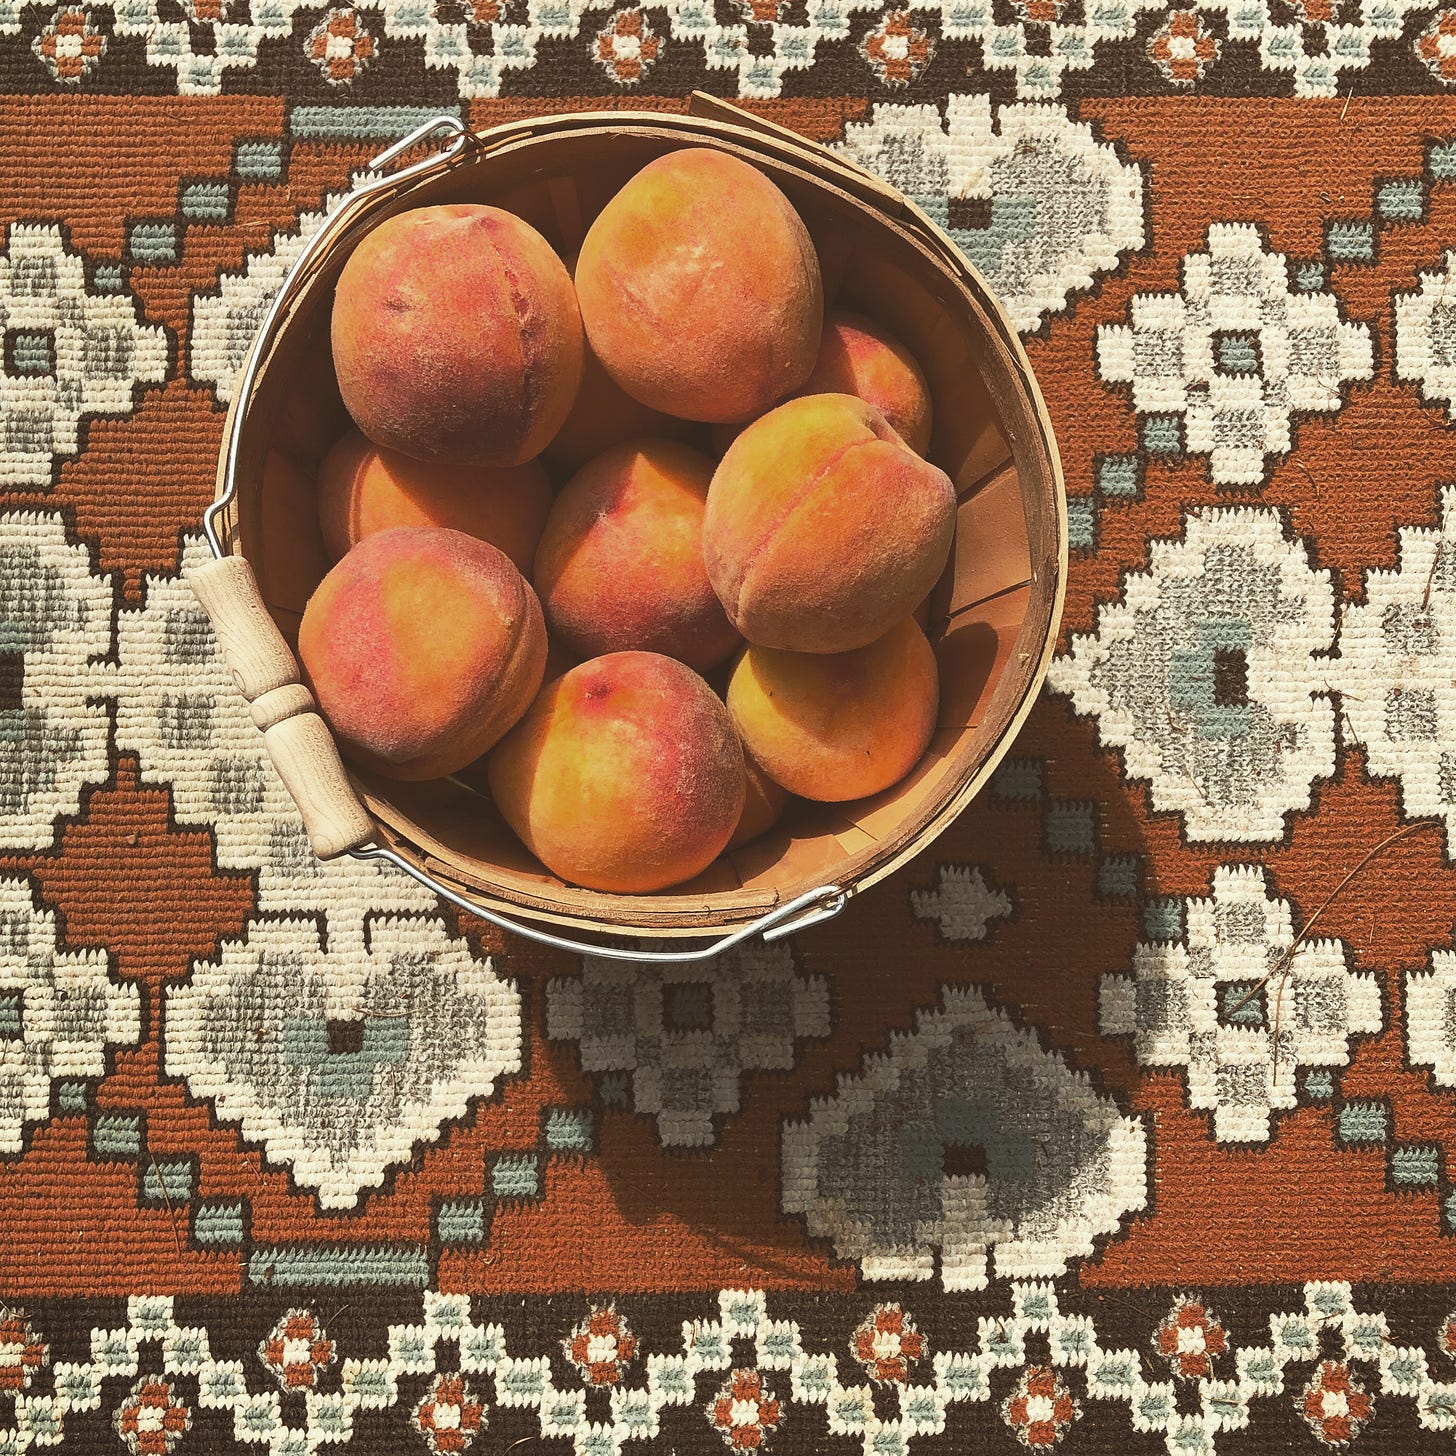 overhead view of basket of peaches on a patterned rug.